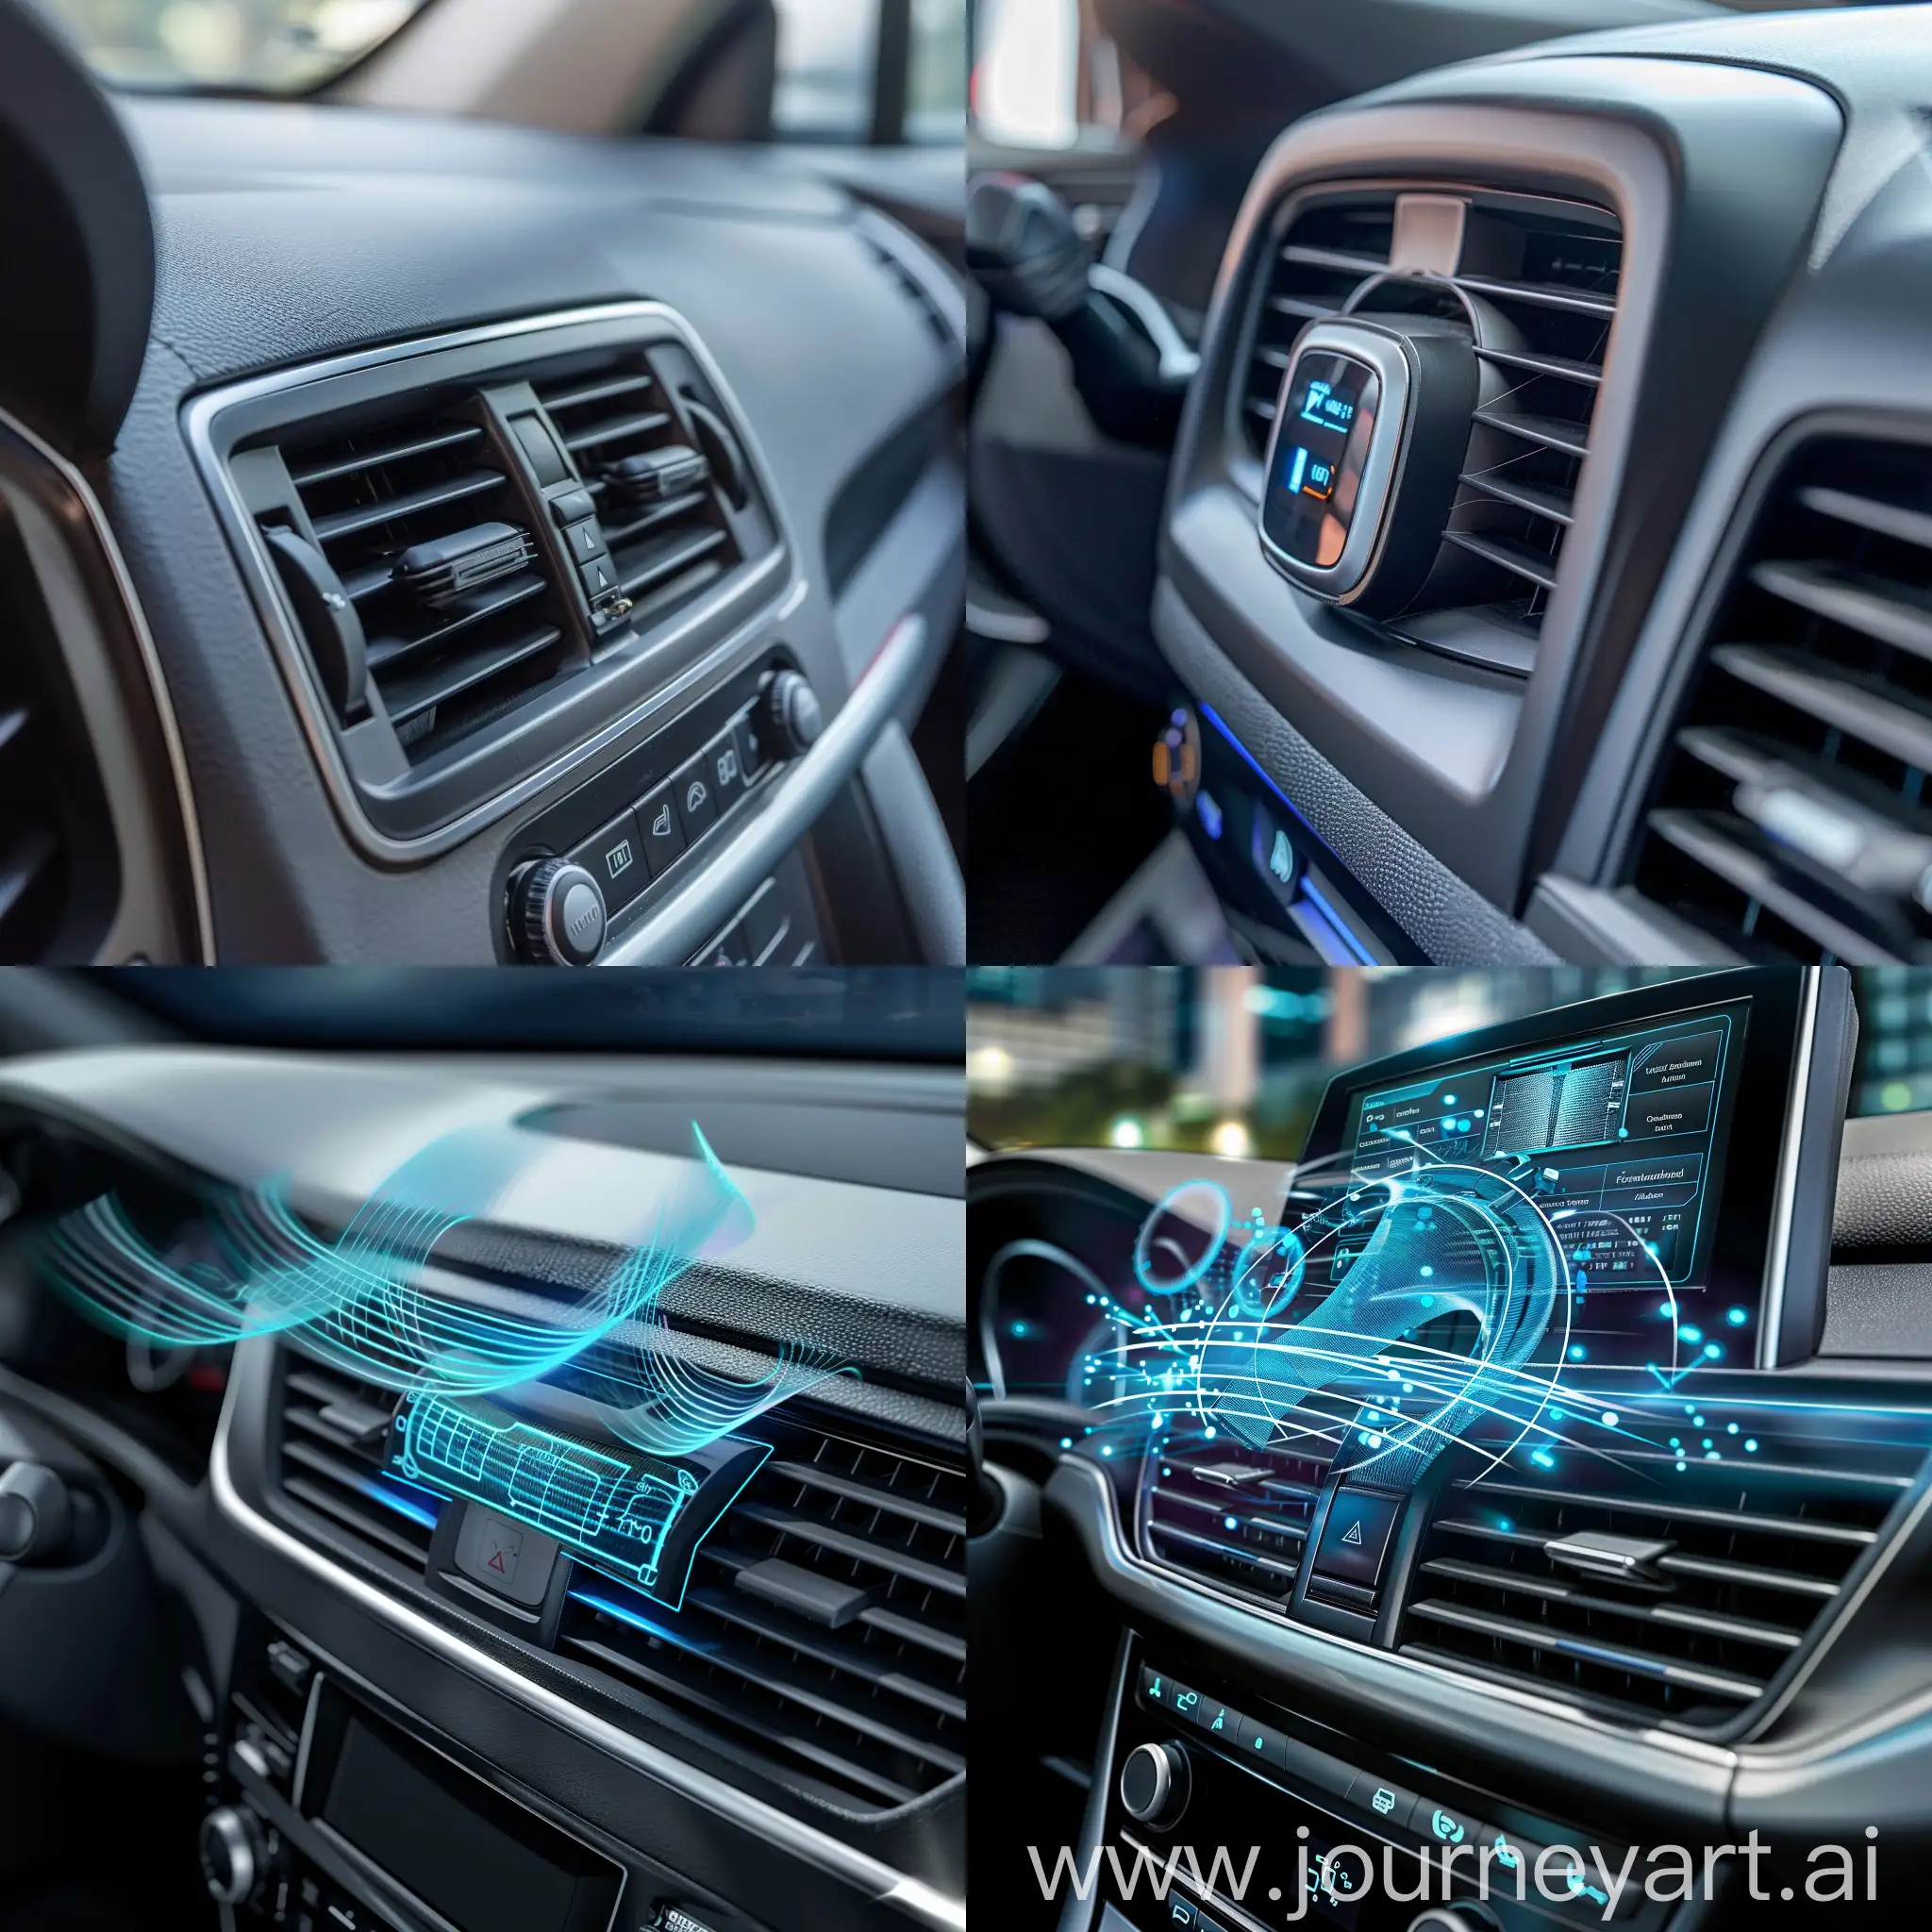 Efficient-V6-Air-Conditioning-System-in-a-11-Aspect-Ratio-Car